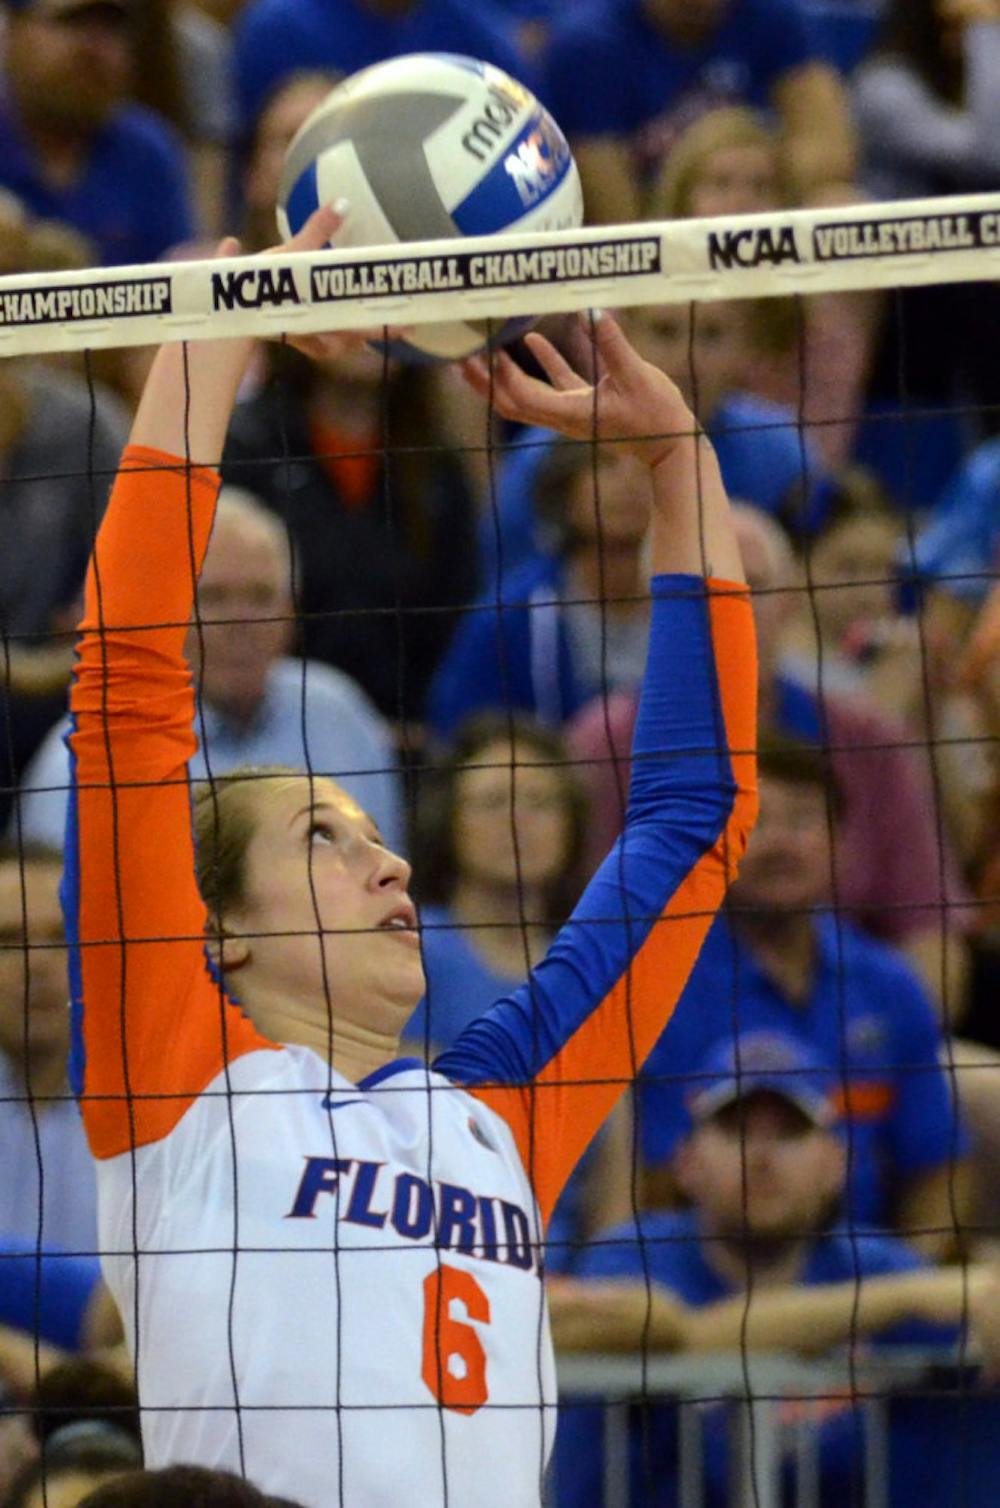 <p>Mackenzie Dagostino sets the ball during No. 8 seed Florida's 3-1 win against Miami in the second round of the NCAA Tournament on Dec. 6, 2014, in the O'Connell Center.</p>